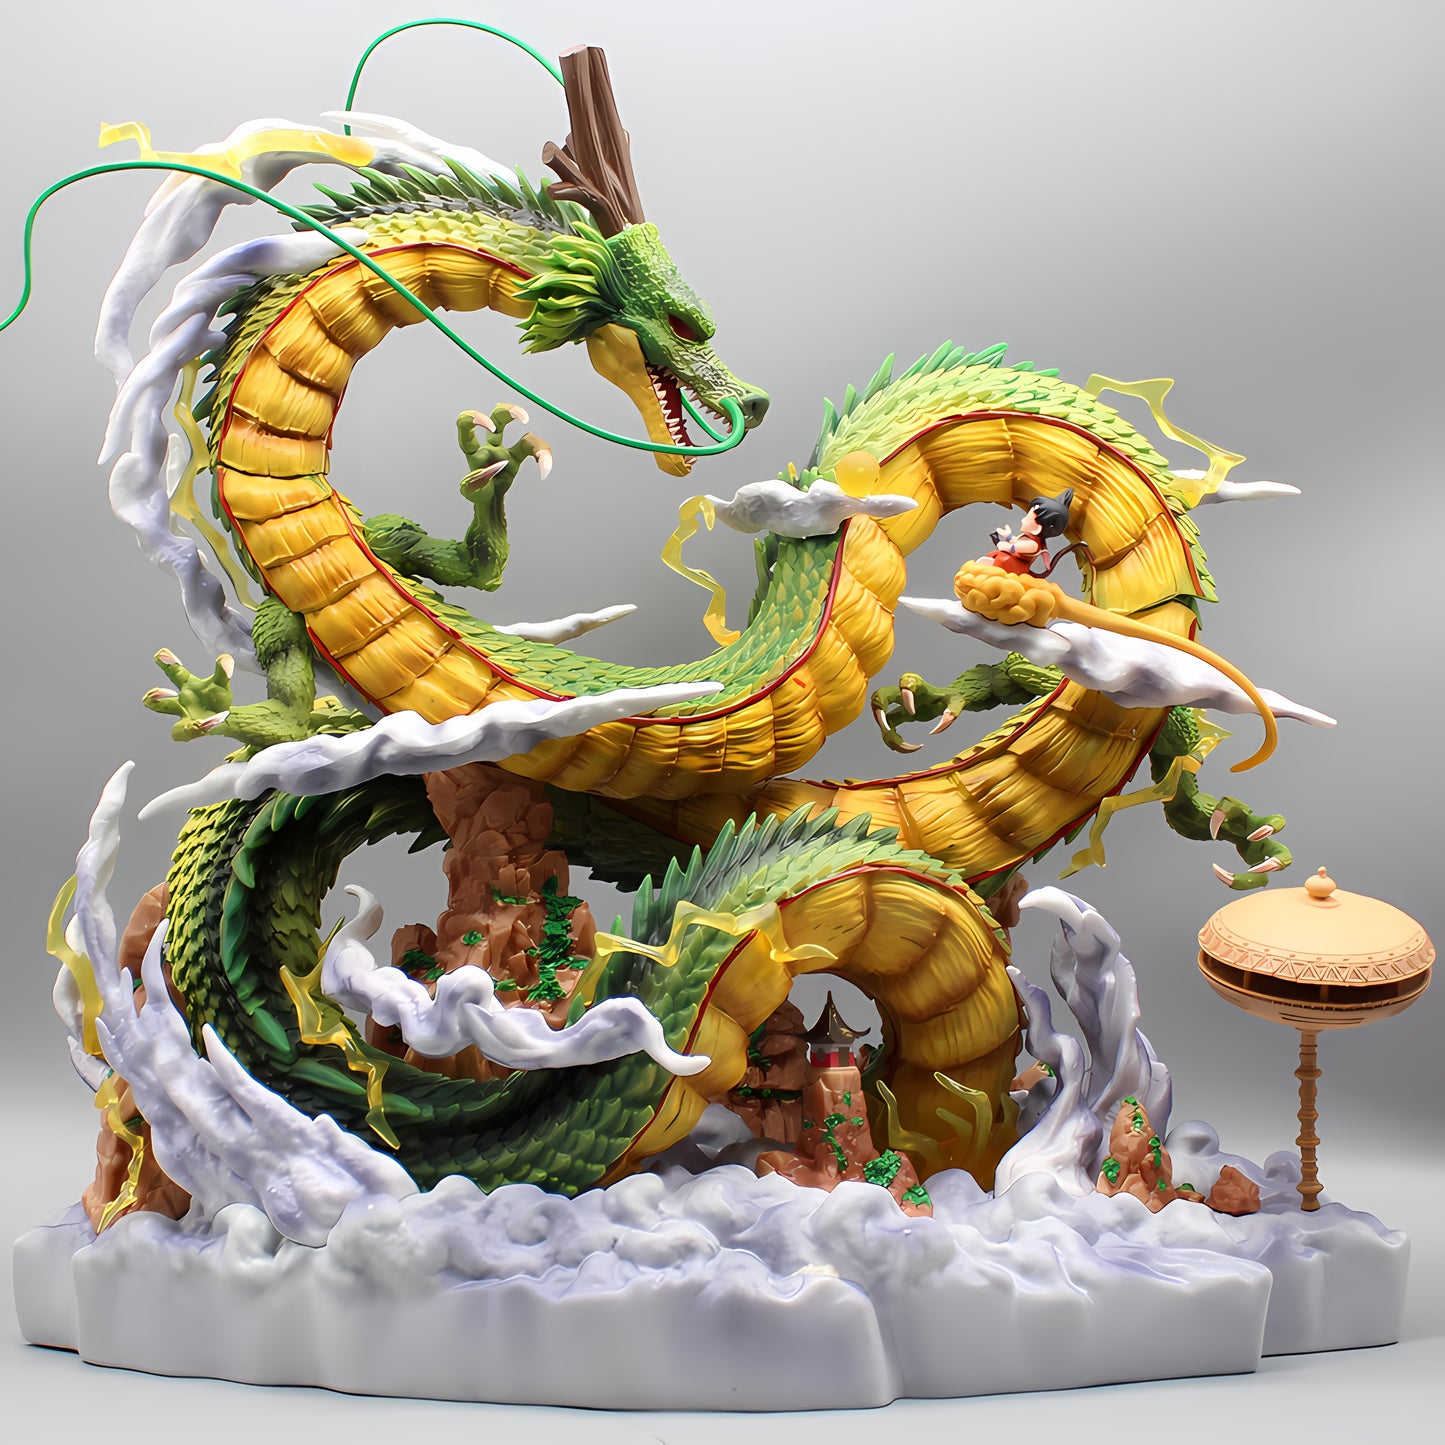 A meticulously crafted Dragon Ball Z collectible statue featuring the iconic Shenron, with a richly detailed design that highlights its serpentine body coiling around rocky formations and cloud-like accents. Goku, in miniature scale, is seen riding Shenron, while a single traditional pavilion stands elegantly to the side, all set against a plain gray backdrop.